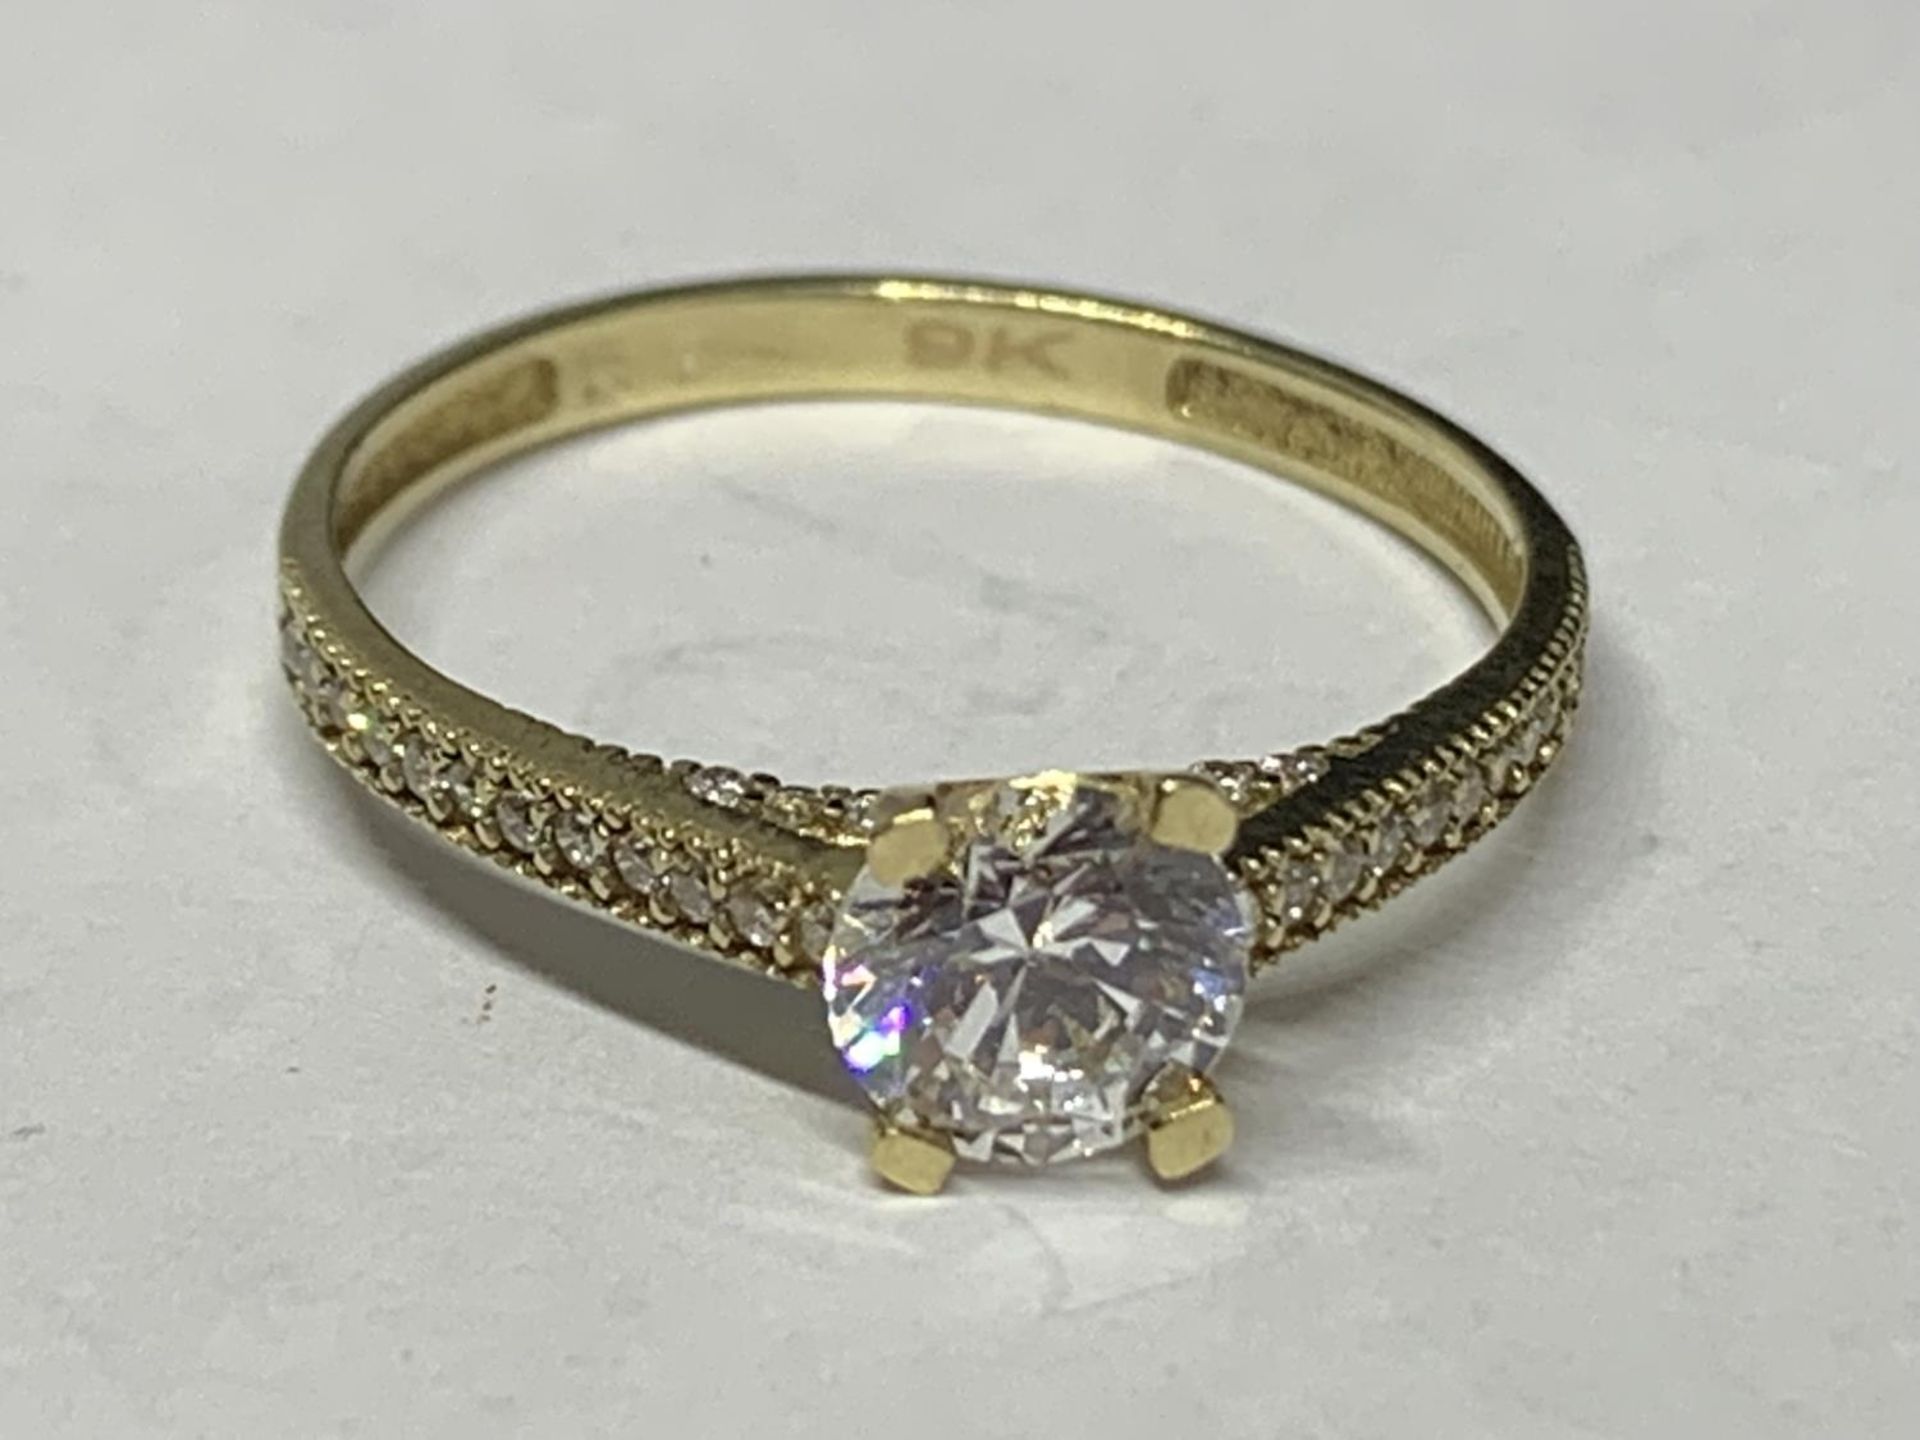 A 9 CARAT GOLD RING WITH A SINGLE CLEAR STONE AND CHIPS ON THE SHOULDERS SIZE O/P IN A